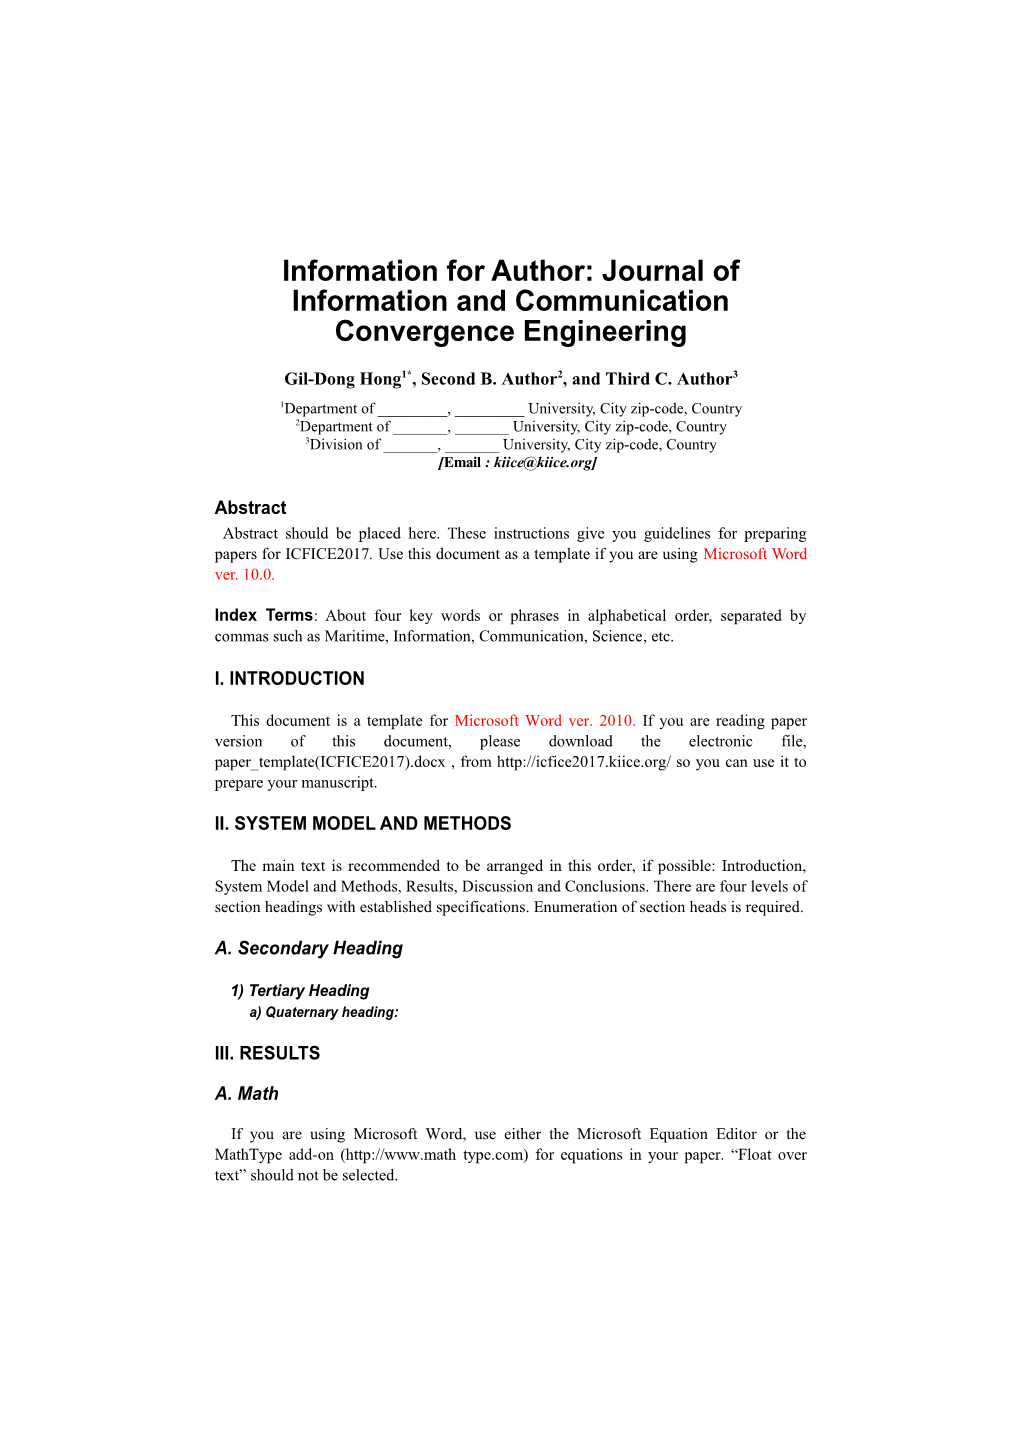 Information for Author: Journal of Information and Communication Convergence Engineering